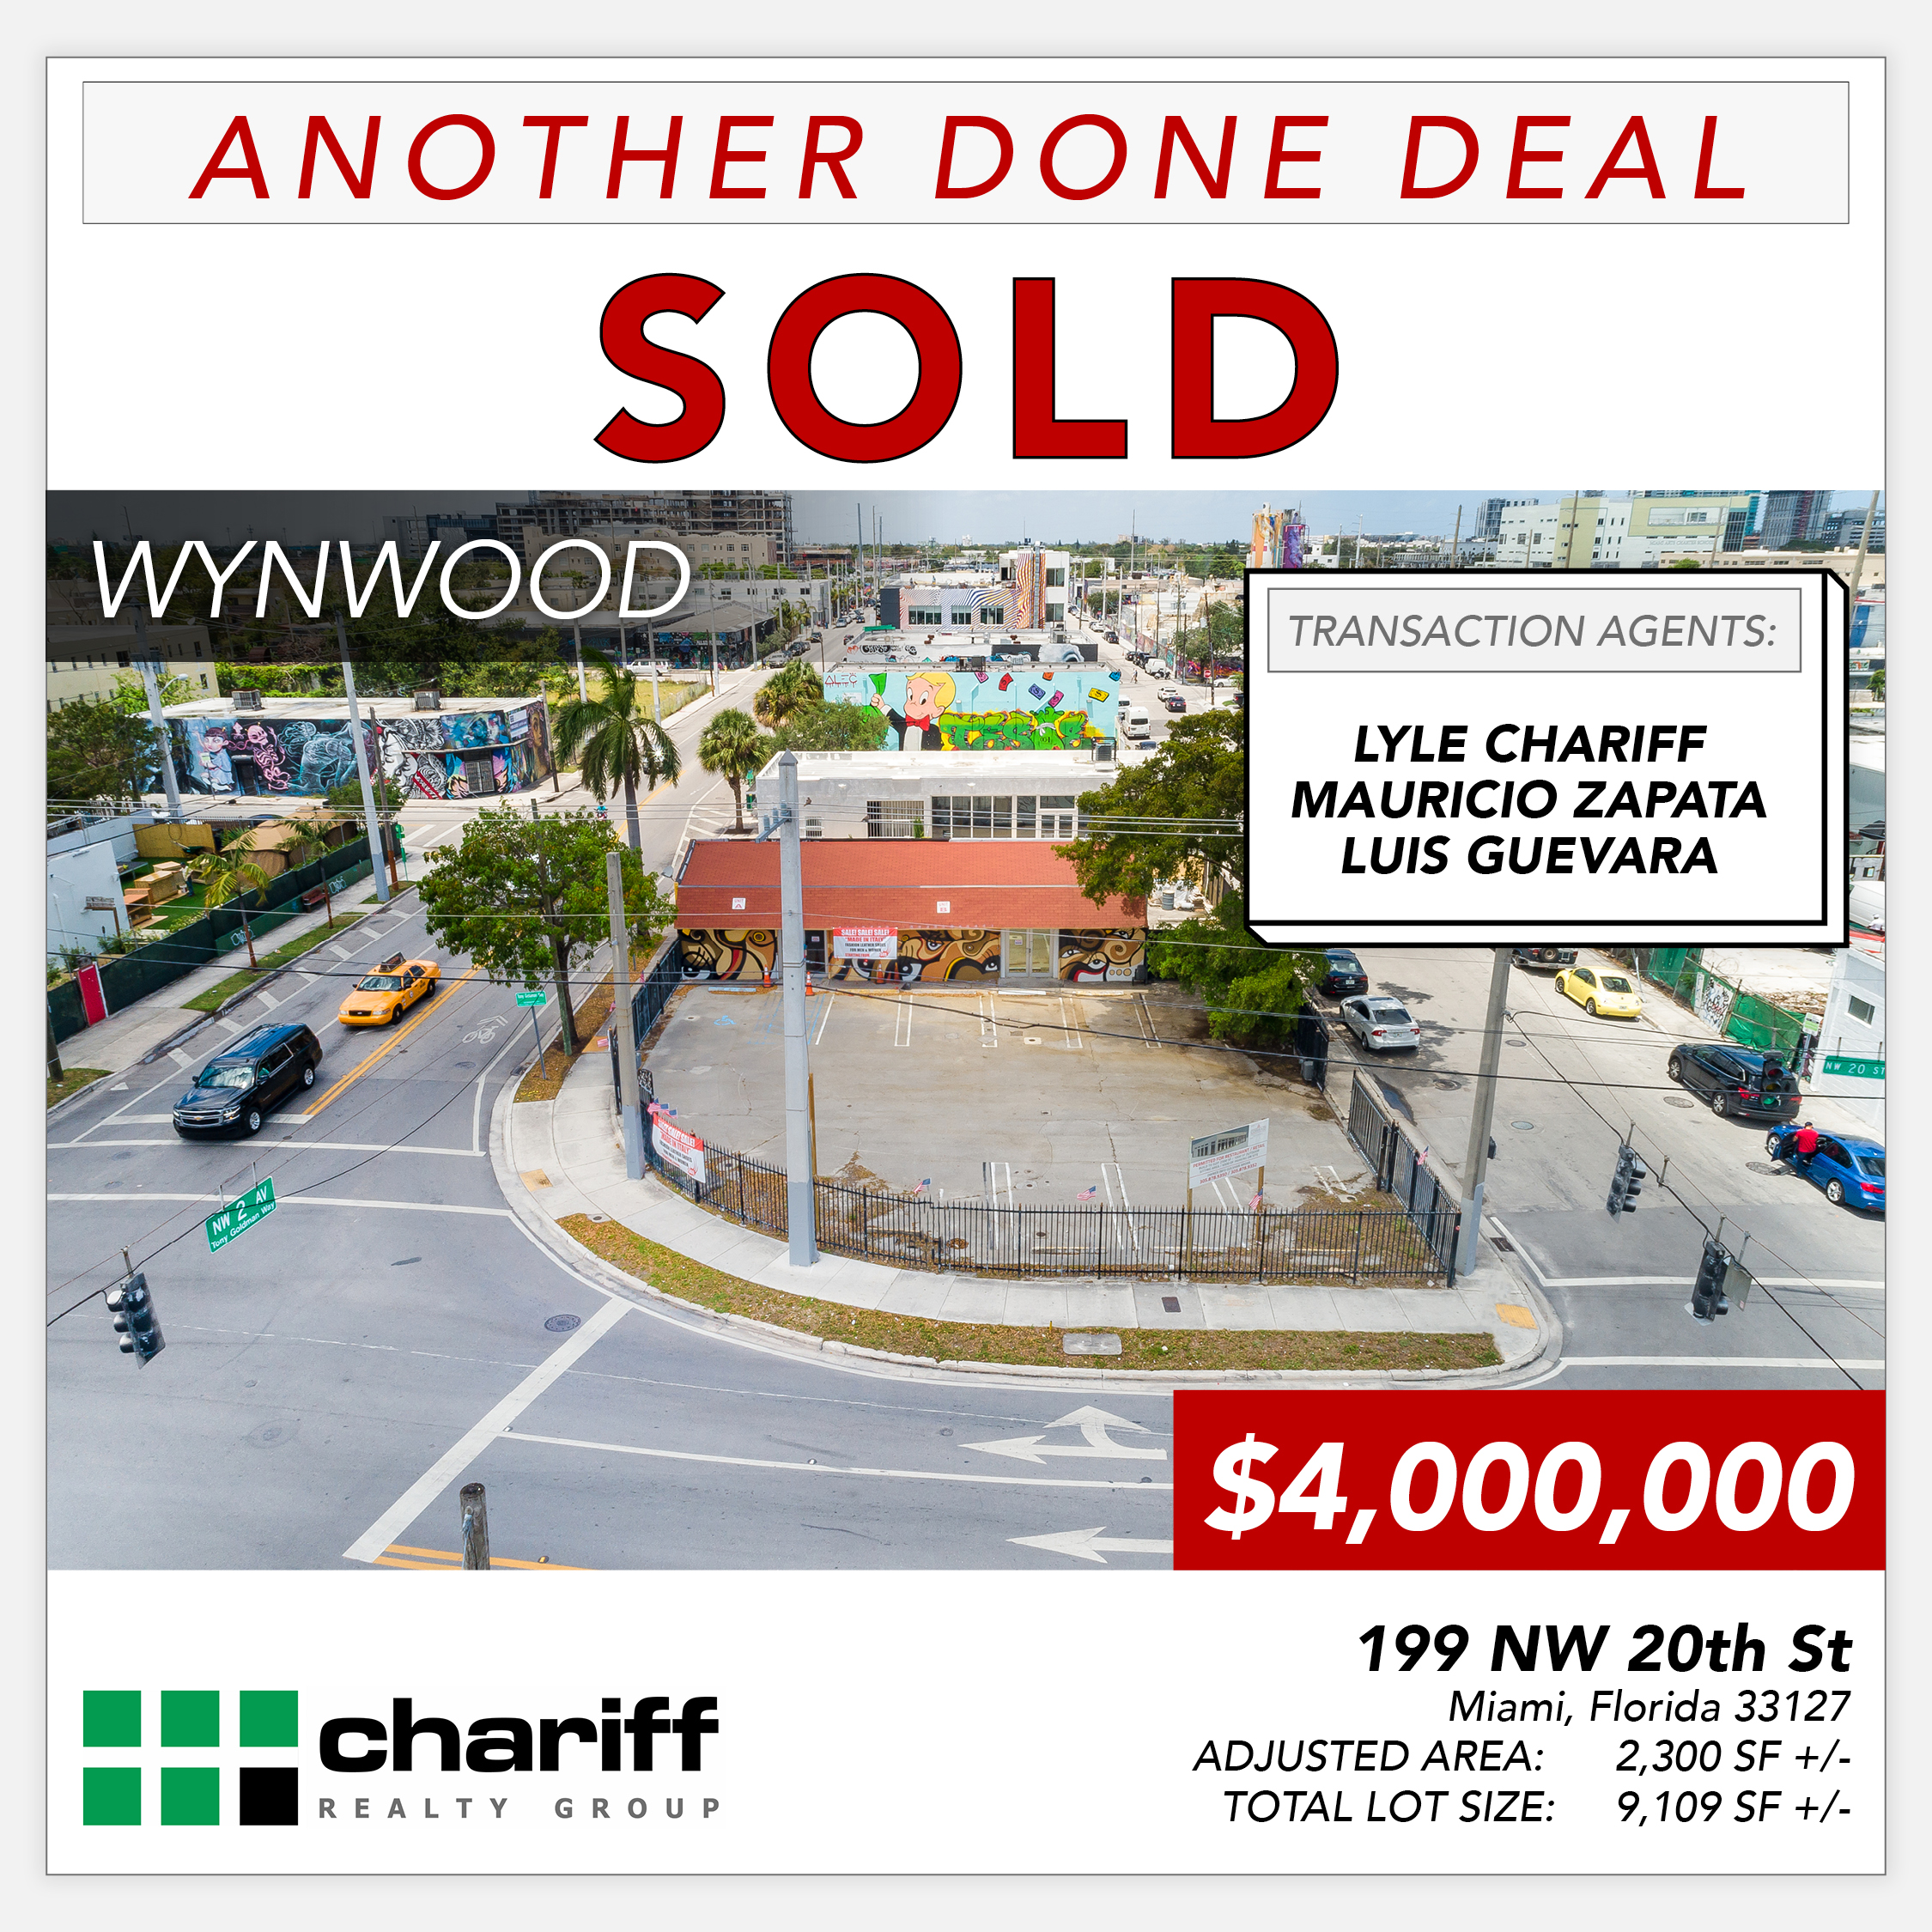 199 NW 20th St - Another Done Deal-Sold-Wynwood-Miami-Florida-33127-Chariff Realty Group